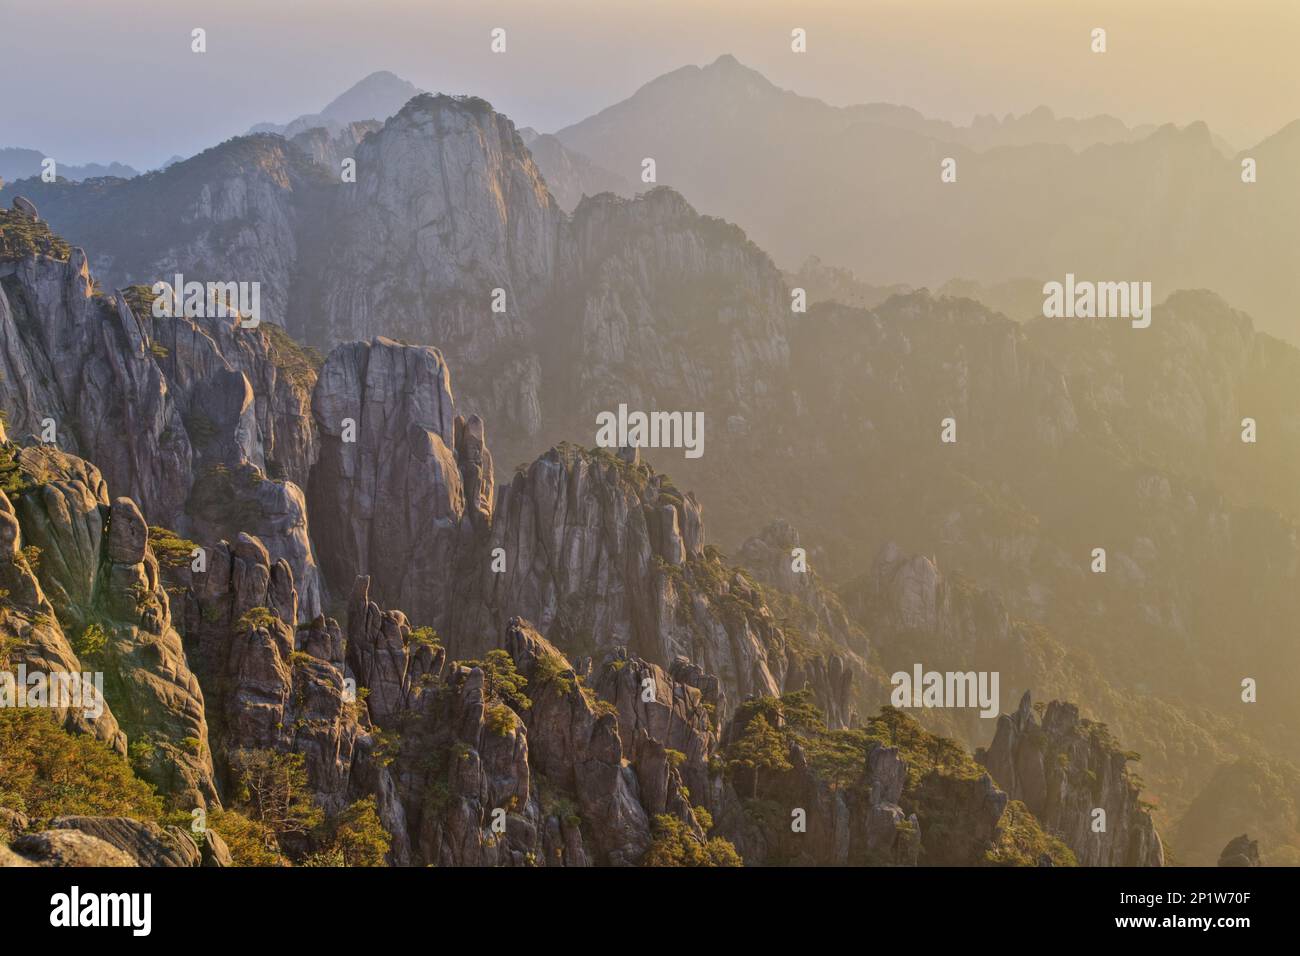 View of mountain range with granite peaks at sunrise, Huangshan (Yellow Mountains), Anhui Province, China Stock Photo